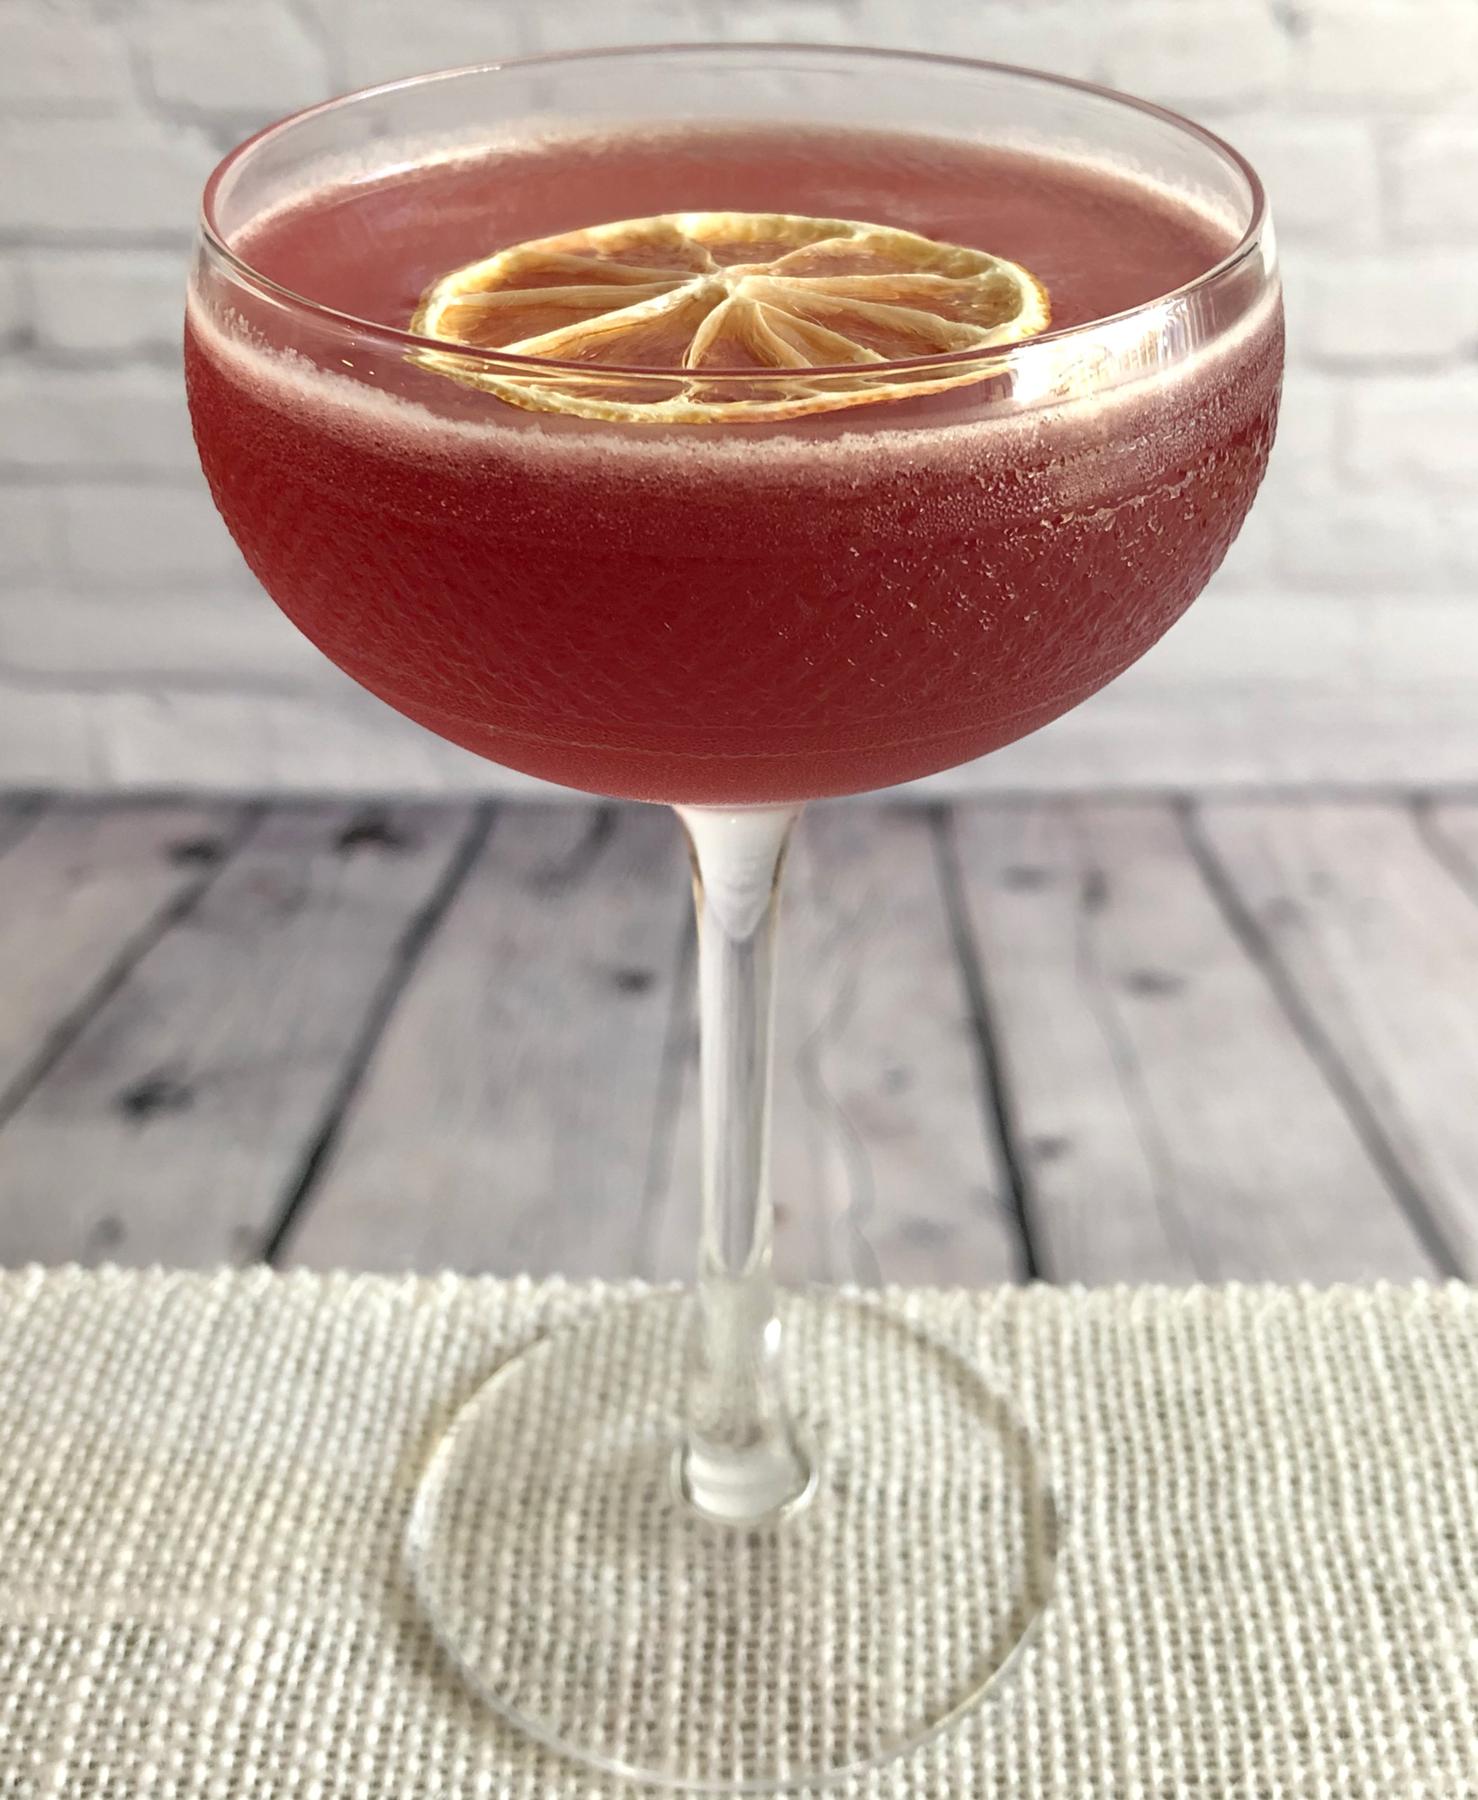 An example of the Scofflaw, the mixed drink (drink) featuring rye whiskey, Cocchi Vermouth di Torino Extra Dry, lemon juice, grenadine, and lemon twist; photo by Lee Edwards